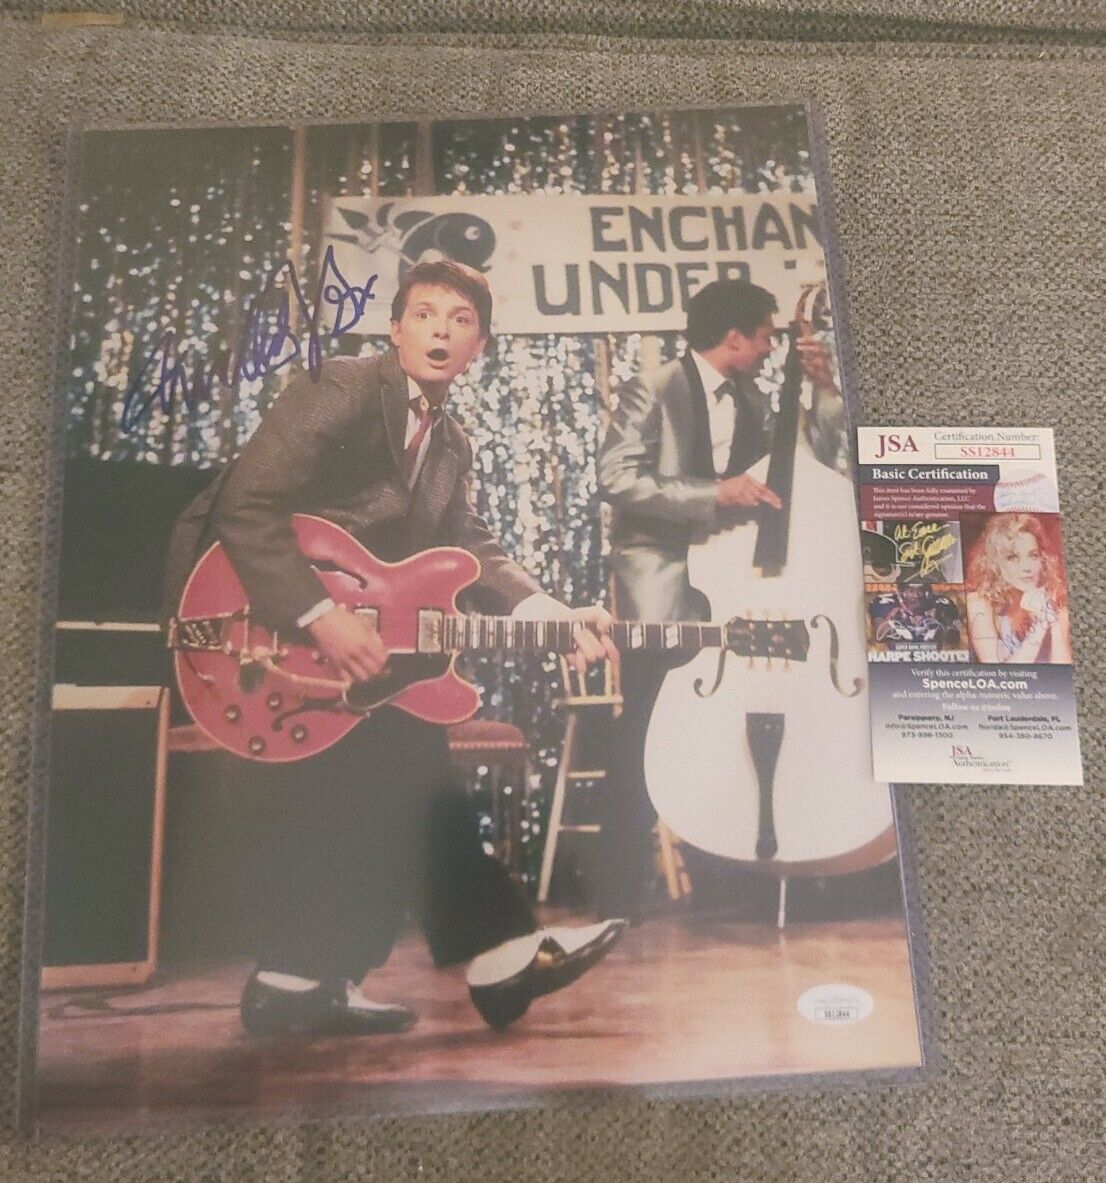 MICHAEL J FOX SIGNED 11X14 PHOTO BACK TO THE FUTURE GUITAR JSA CERTIFIED#SS12844